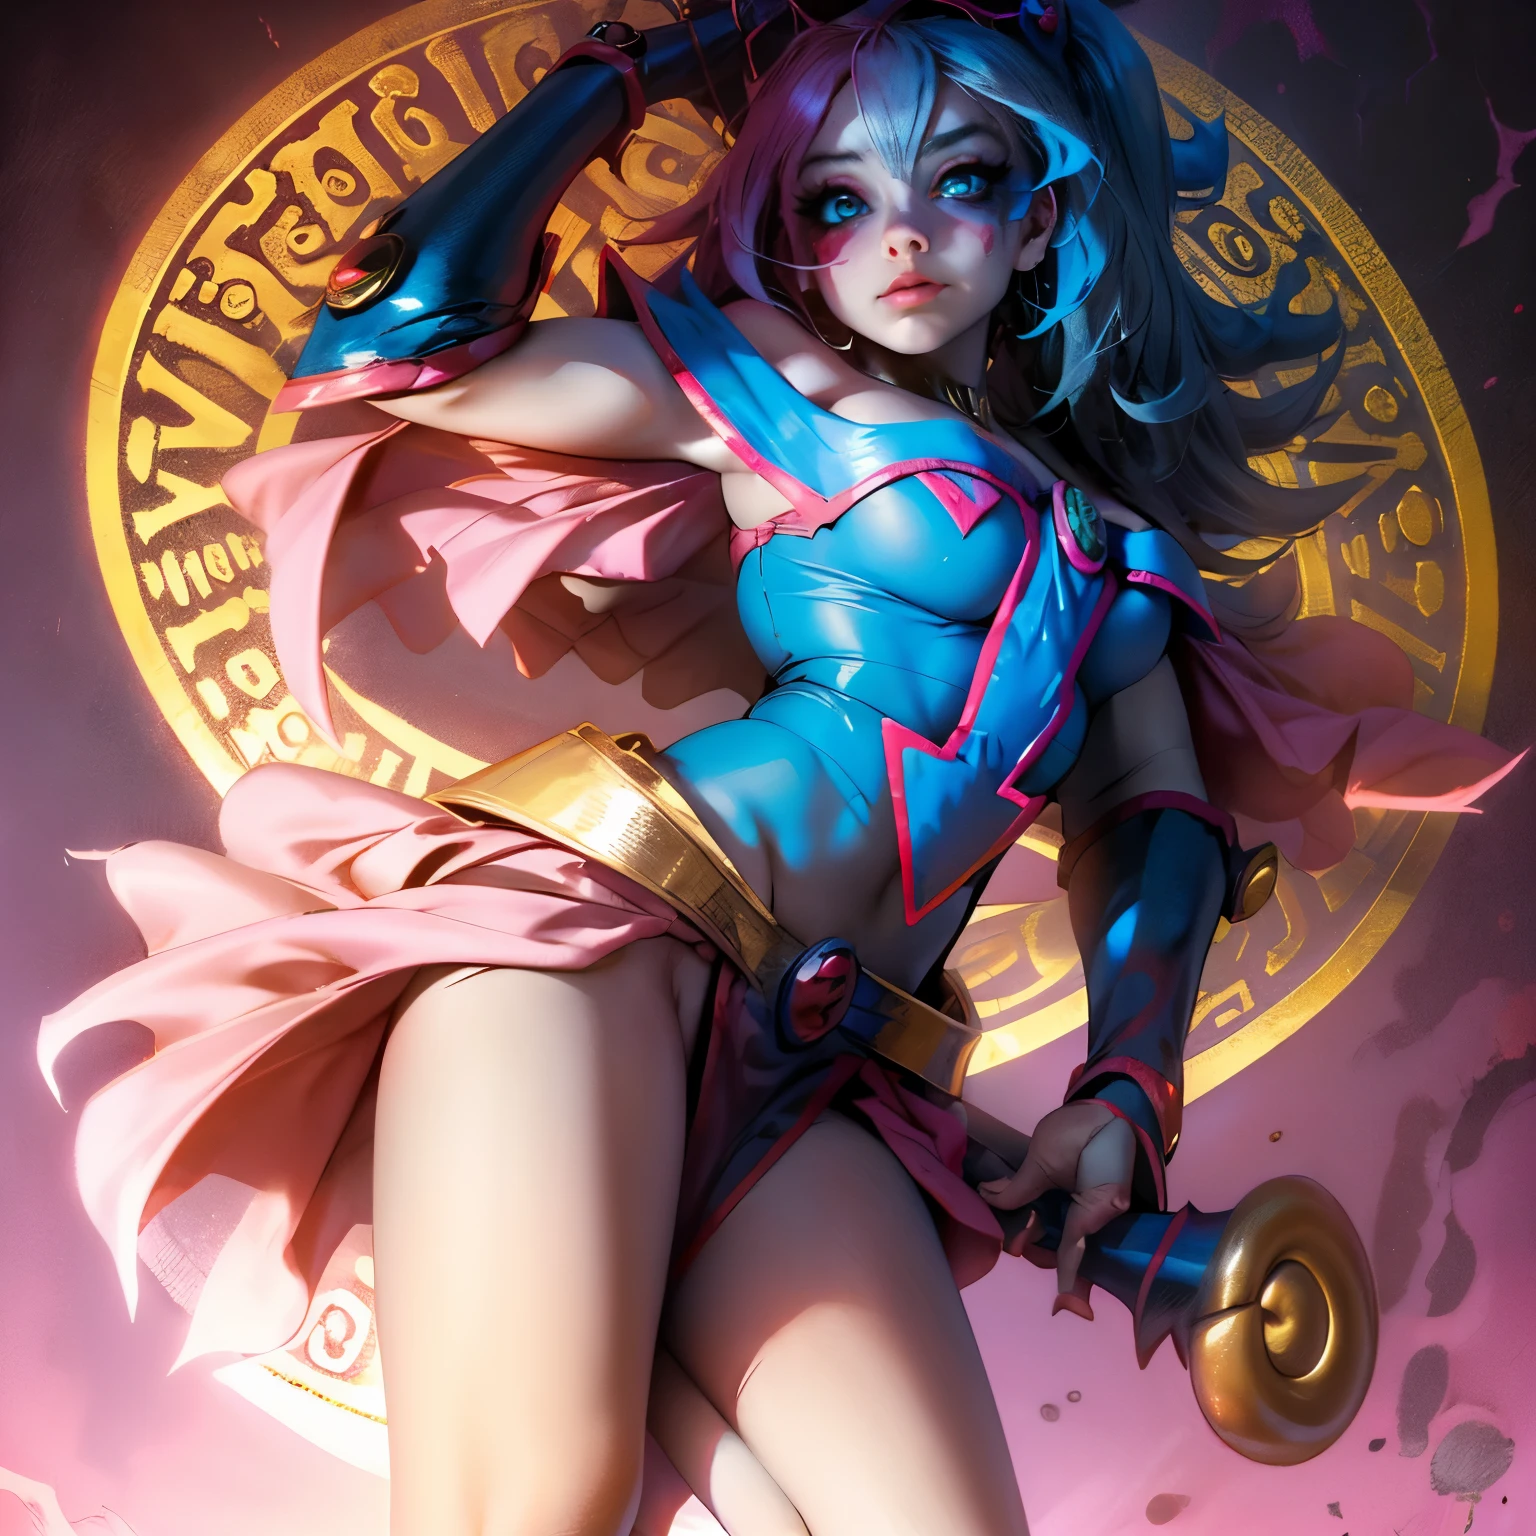 Dark wizard Gils dressed as Harley Quinn. He has blonde and black hair. blue eyes. Red lips. Dark magician gils is dressed as Harley Quinn. Sensual and innocent pose. Circus and magic background.